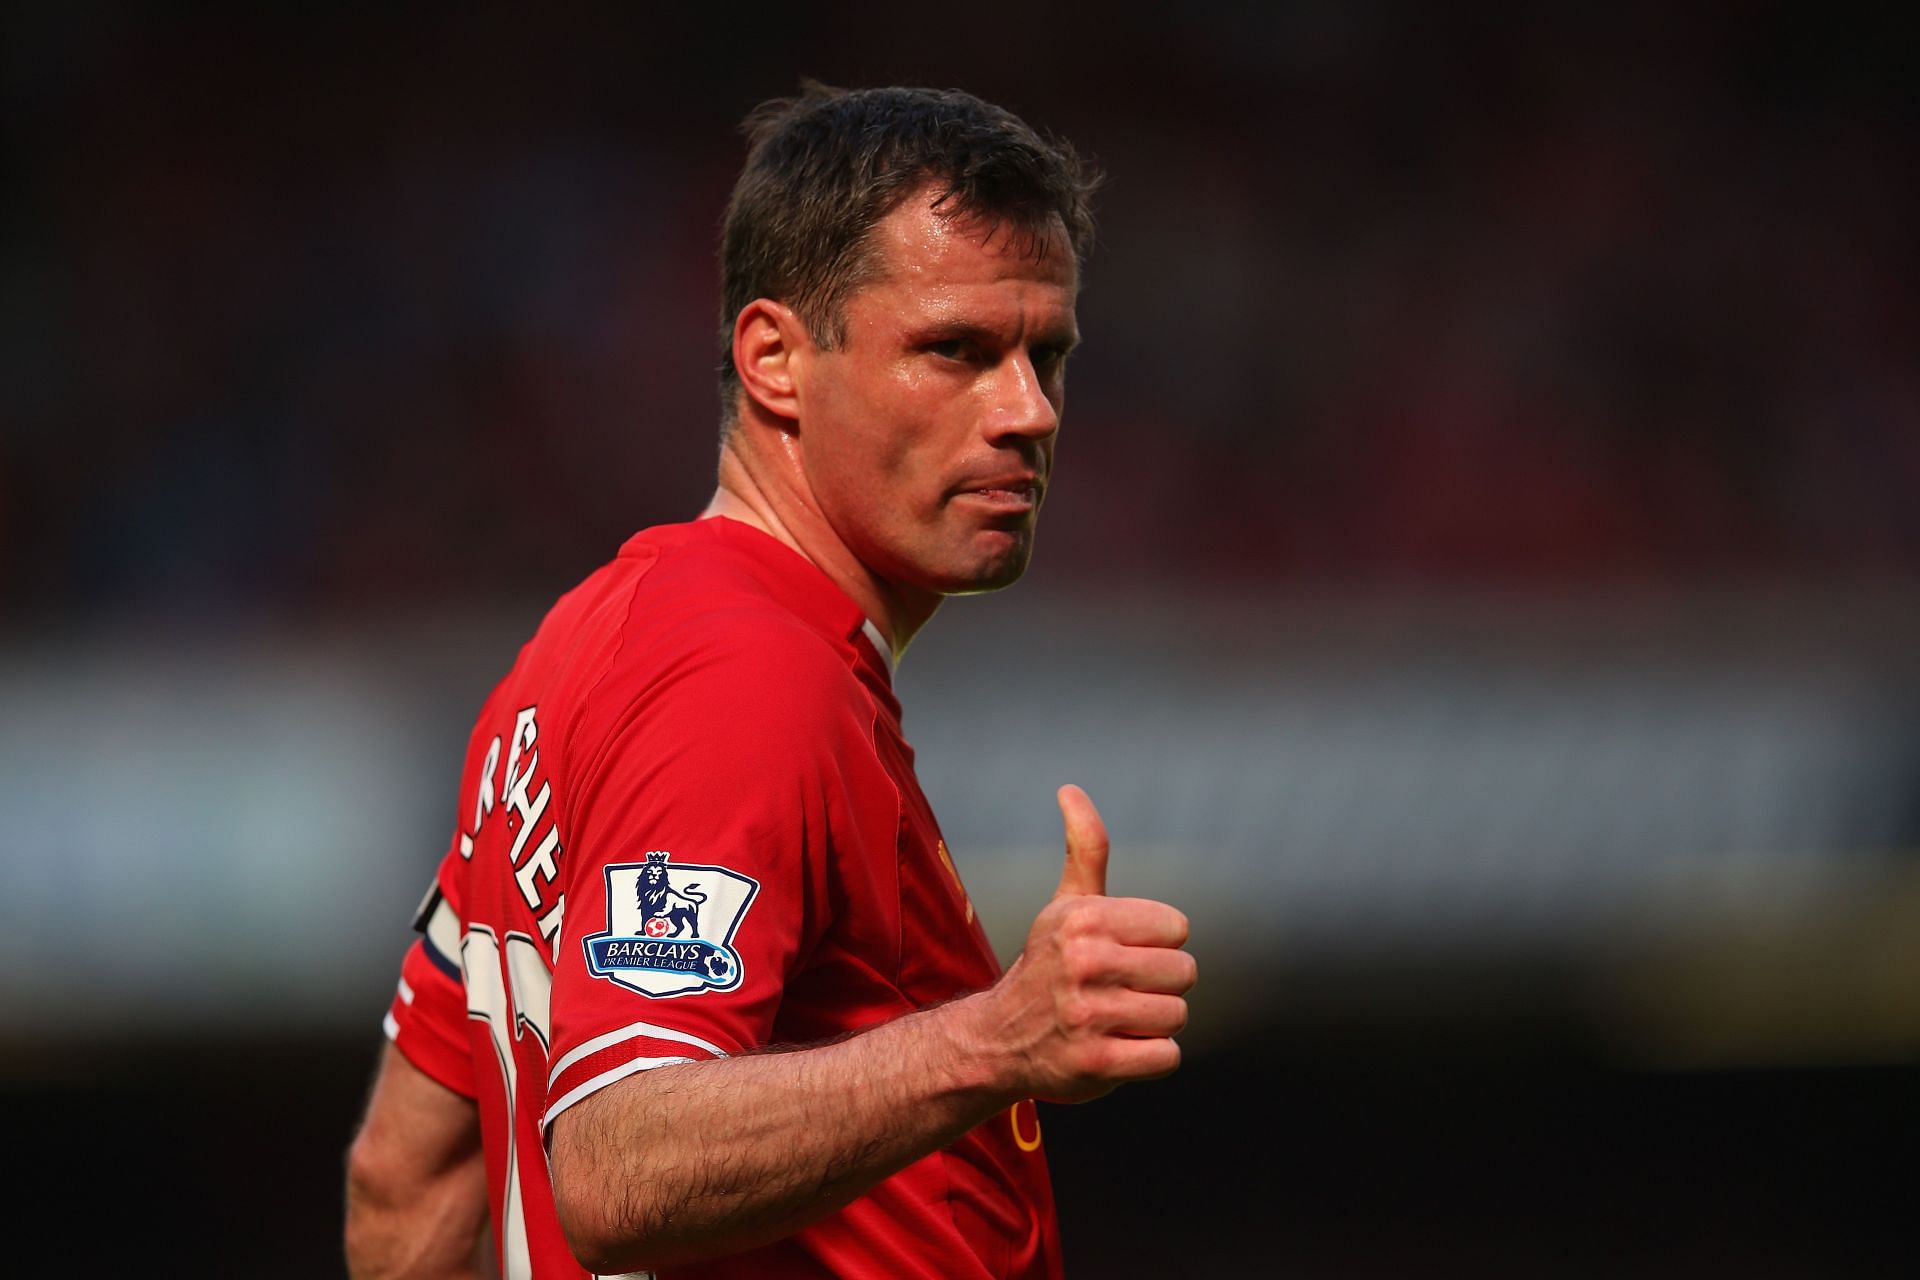 Carragher giving a thumbs up to the Liverpool fans